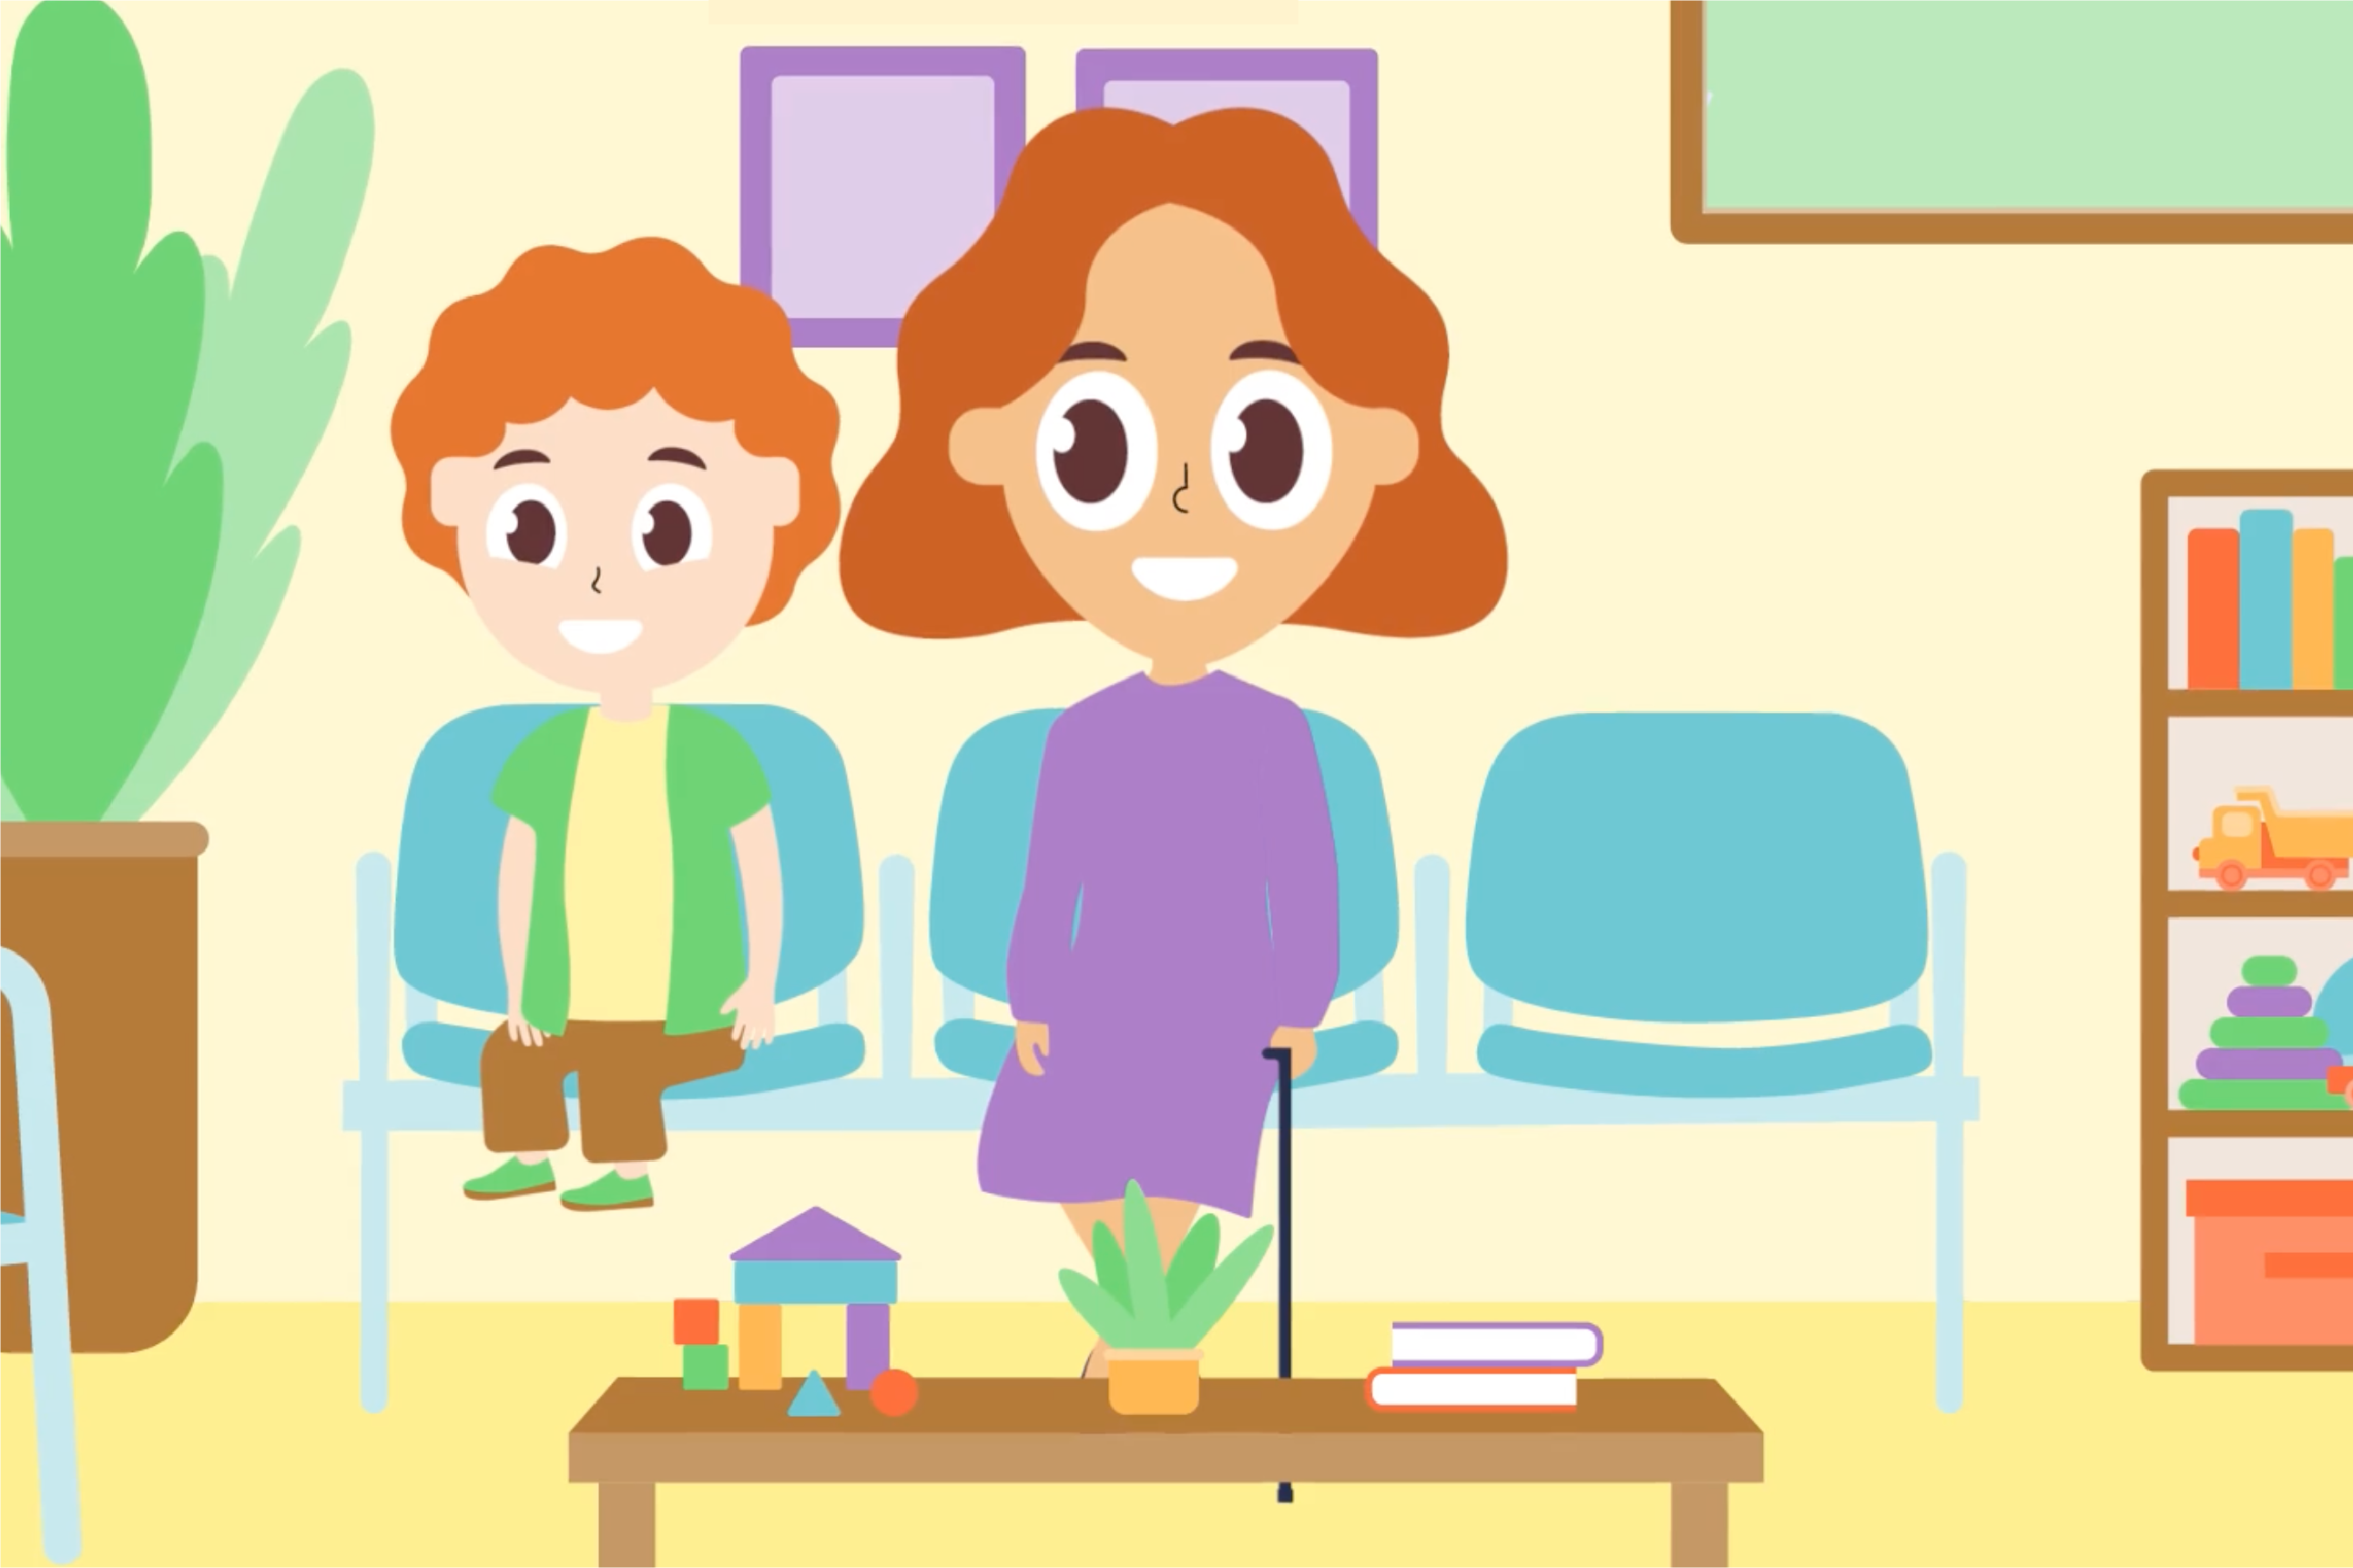 A colourful and simple illustration of a woman and child with large eyes sitting on chairs in a waiting room surrounded by toys and books